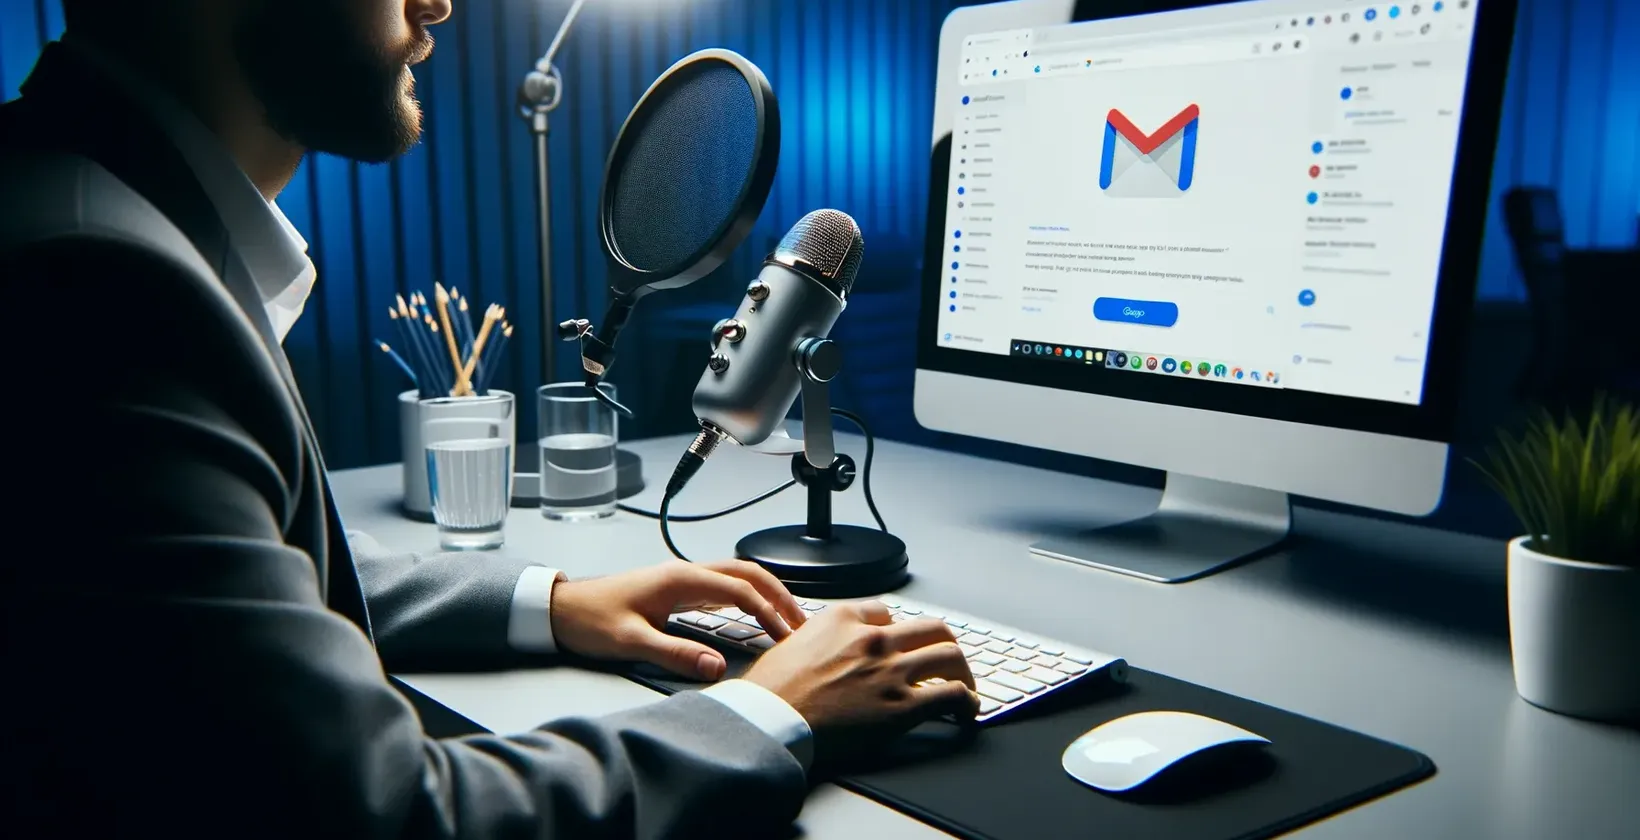 There is a man in front of a computer microphone, preparing to dictate an email with Gmail open on the screen